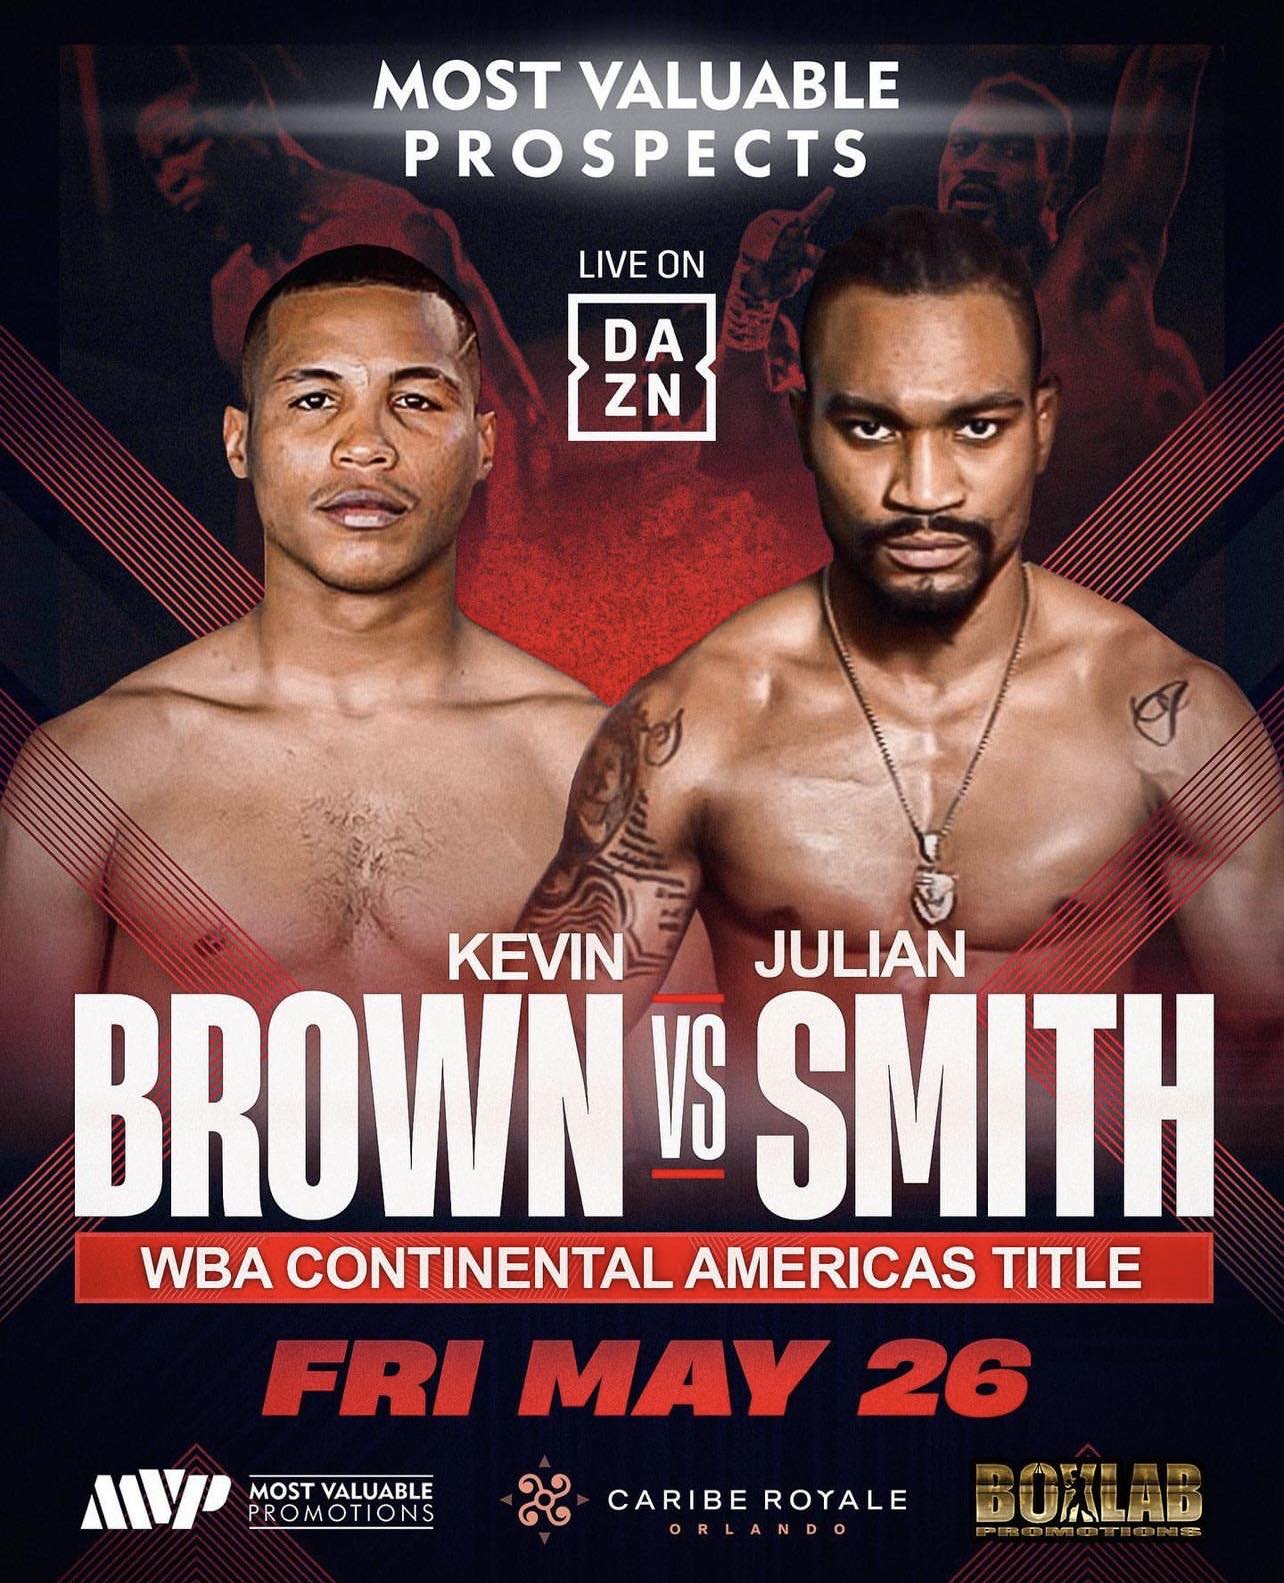 Promotional flyer for the upcoming boxing match between Julian Smith and Kevin Brown, contending for the WBA Continental Americas Title, scheduled for Friday, May 26th.